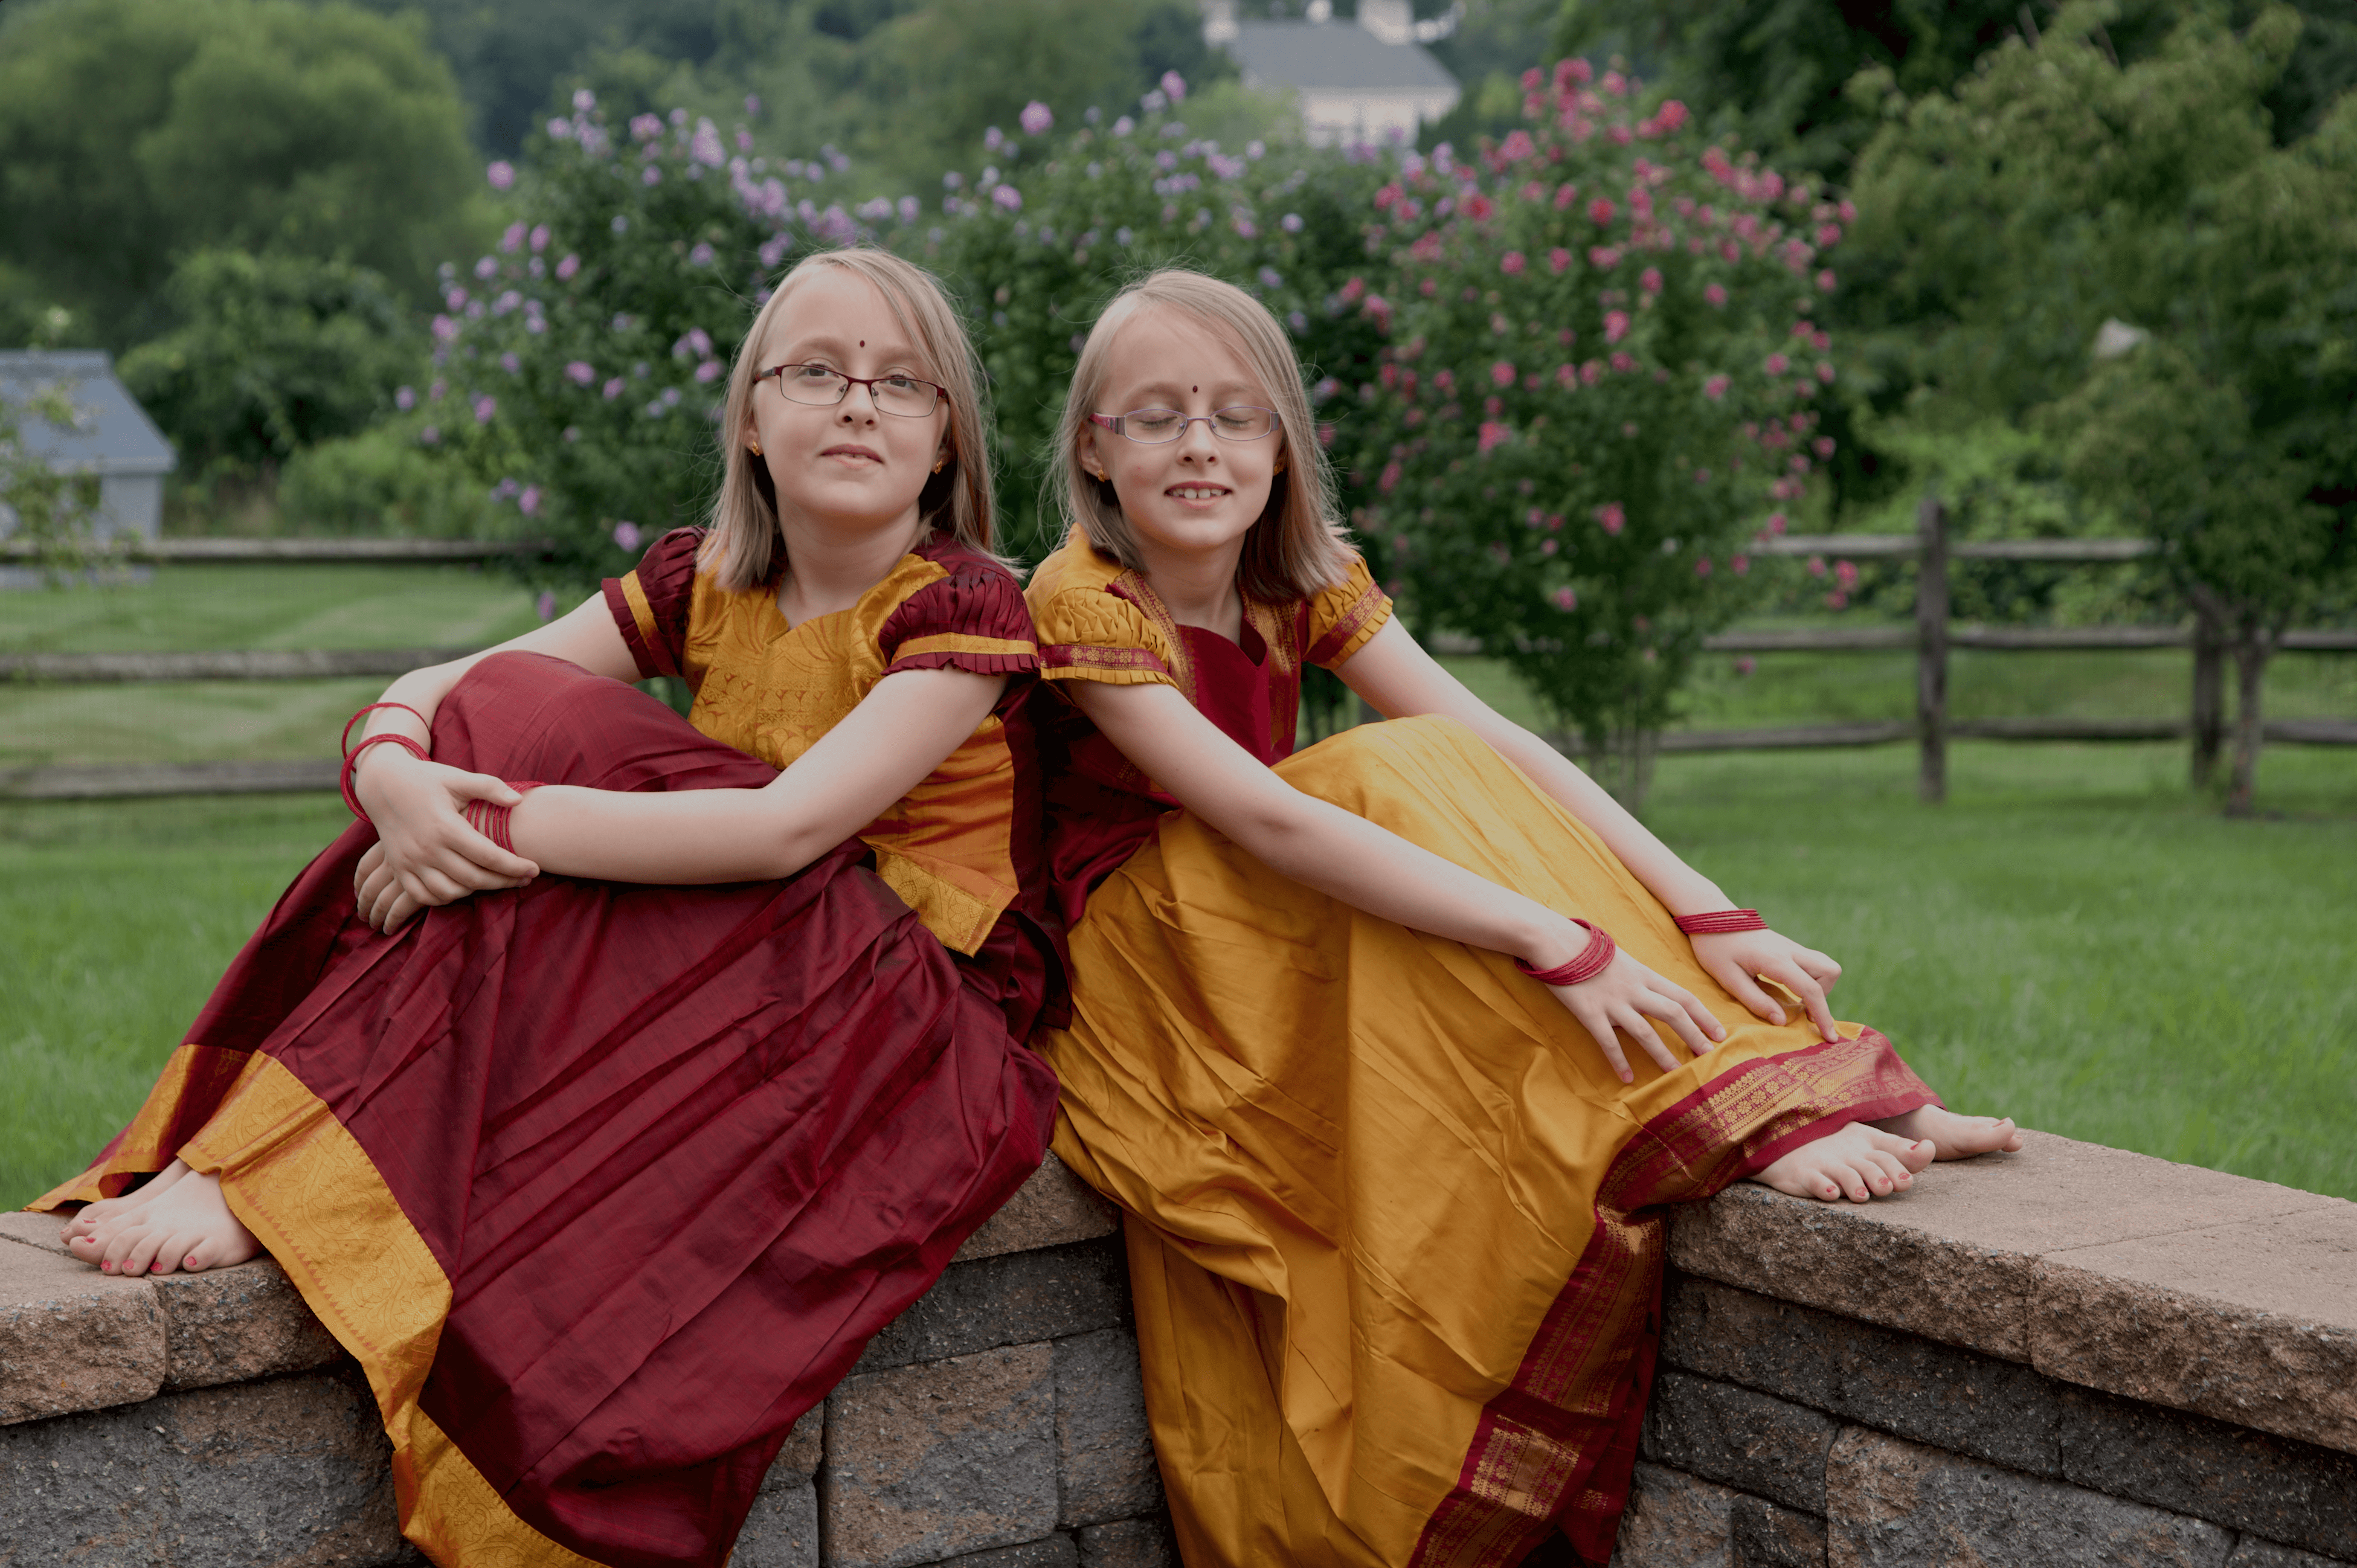 Fraternal white twins Anjali and Meghna dressed in traditional south Indian Kancheepuram silk skirts and blouses in red and mustard colors are sitting and leaning against each other. Meghna's arms are crossed around her knee and she is looking at the camera. Anjali is smiling with her eyes closed and her arms are stretched out and resting on her legs. Both are wearing spectacles, red dots on their forehead and red bangles, and their nails are painted red. They have shoulder length blonde straight hair.